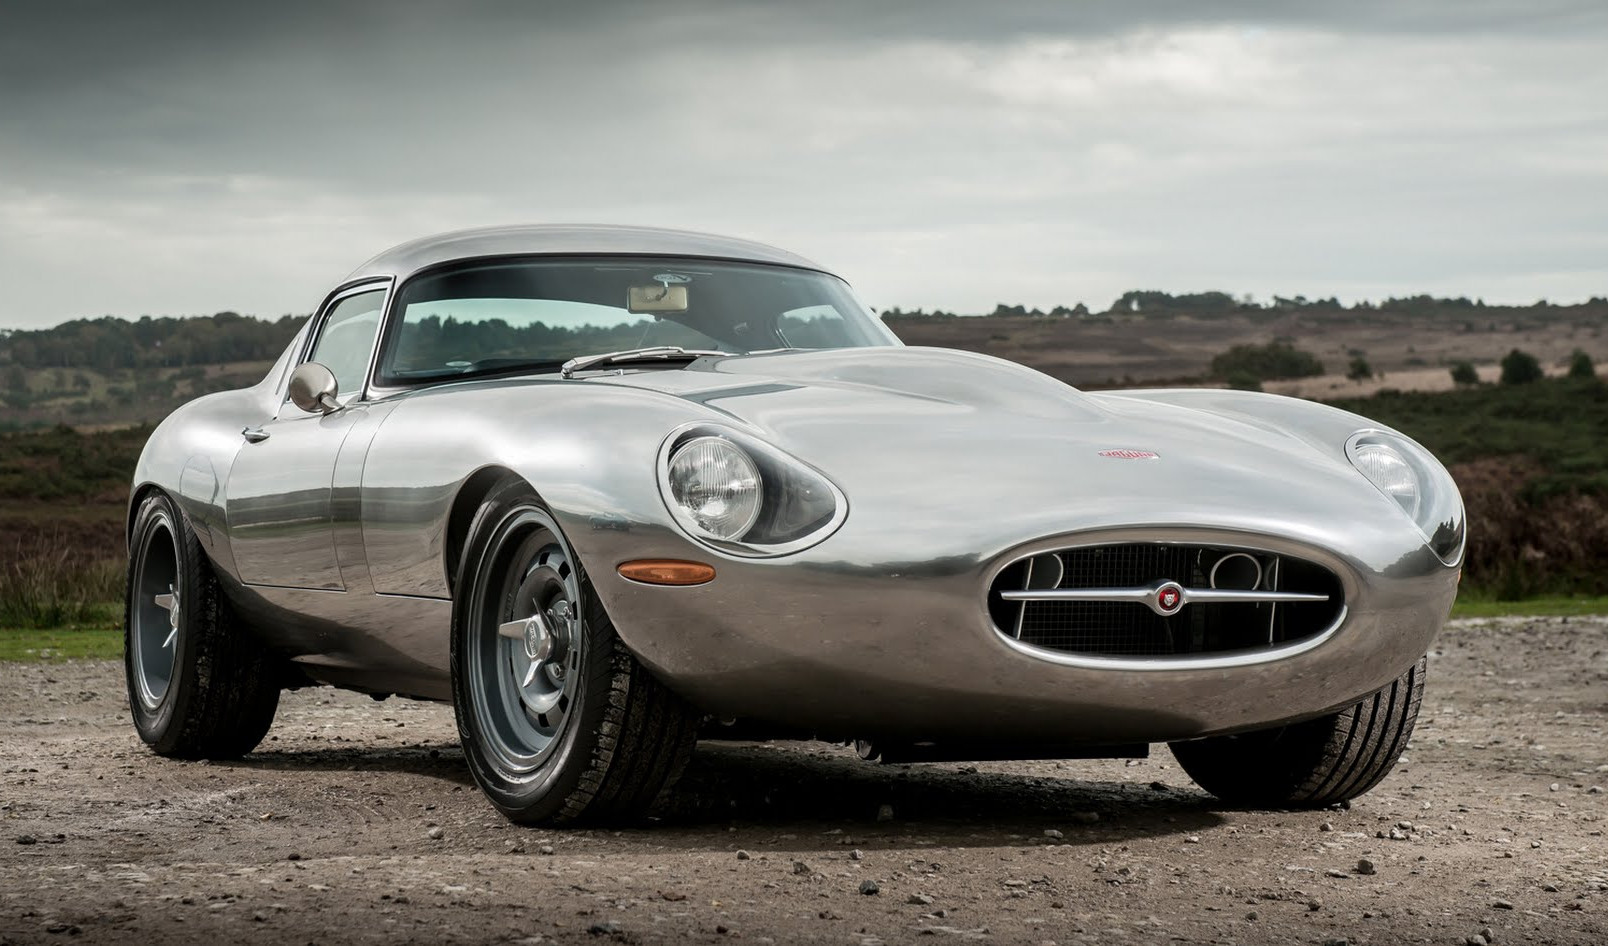 The Eagle Low Drag manages to capture the beauty of the Jaguar E-type and yet impart to it a hint of the aesthetics of the D-type creating a car that combines graceful beauty with an almost aggressive presence to it. (Picture courtesy of Eagle).